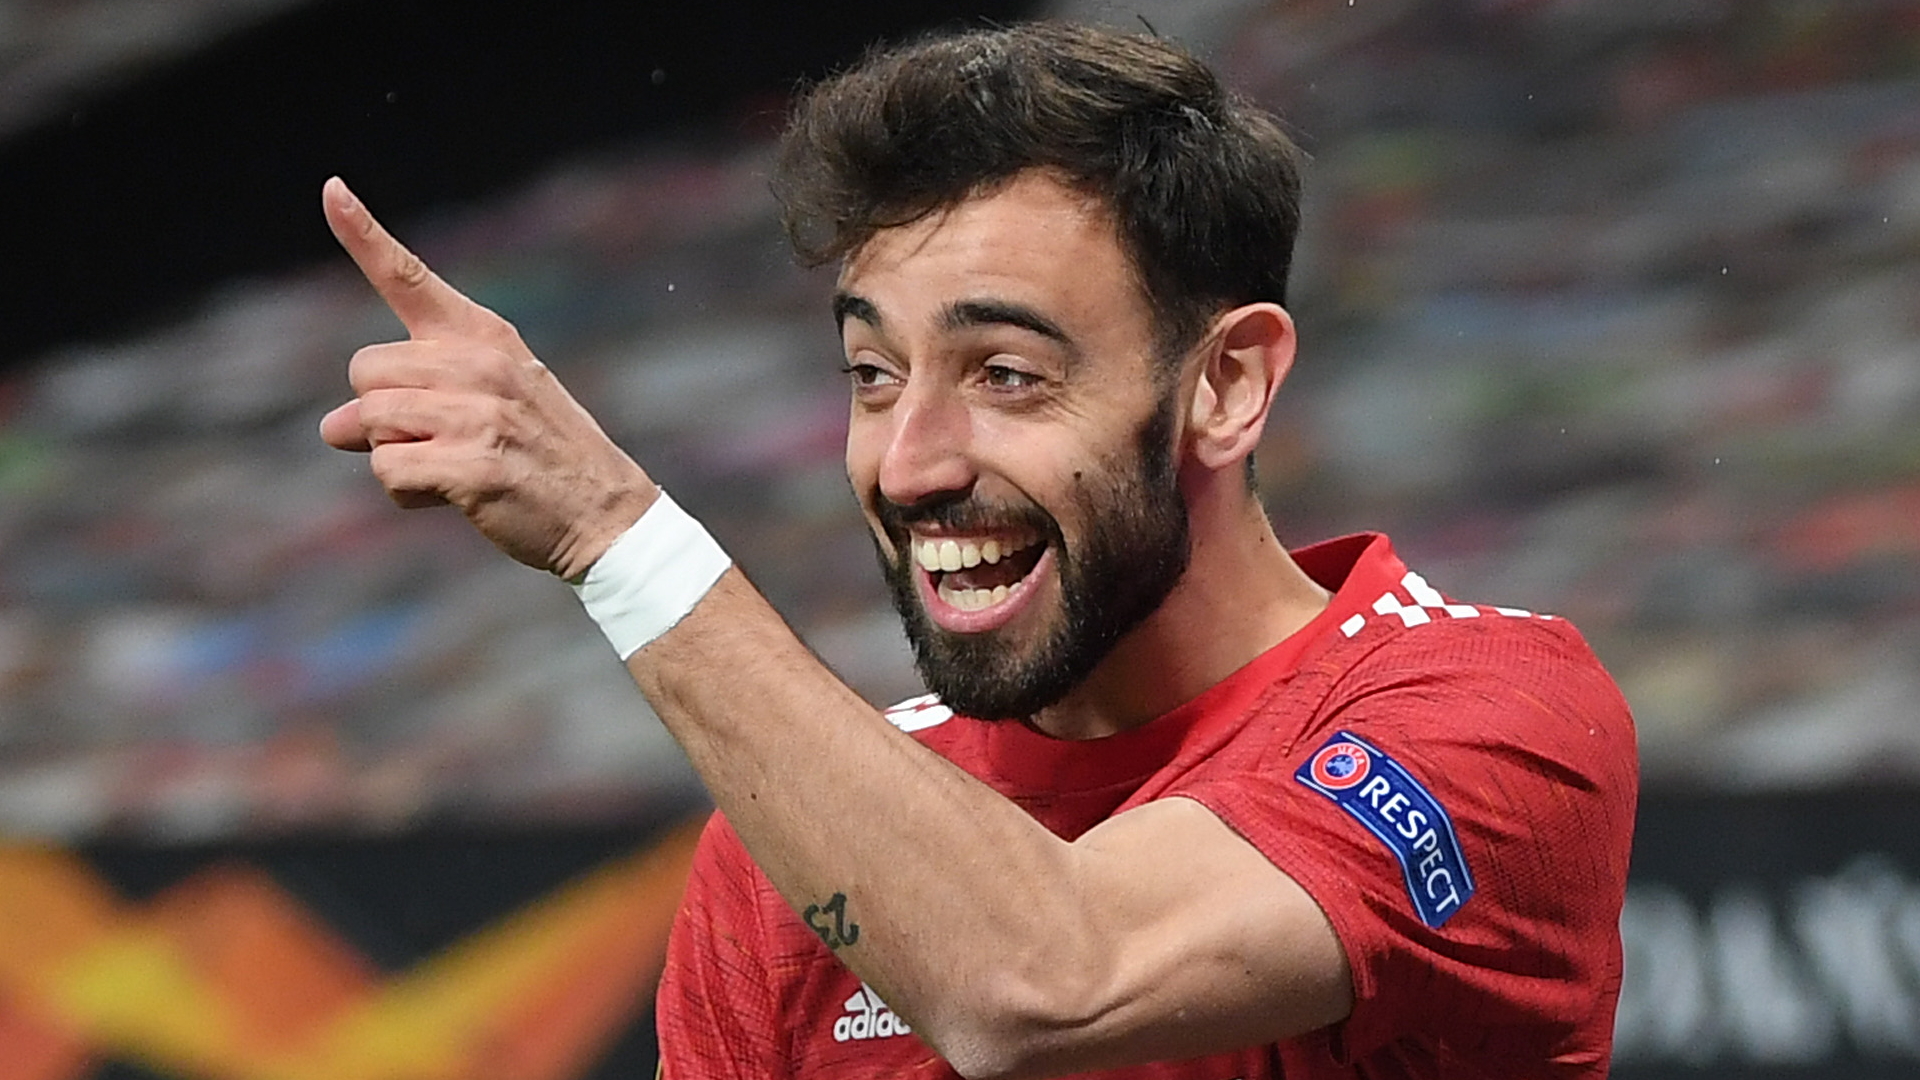 Fernandes reacts to Cantona comparisons at Man Utd and embraces 'good pressure'